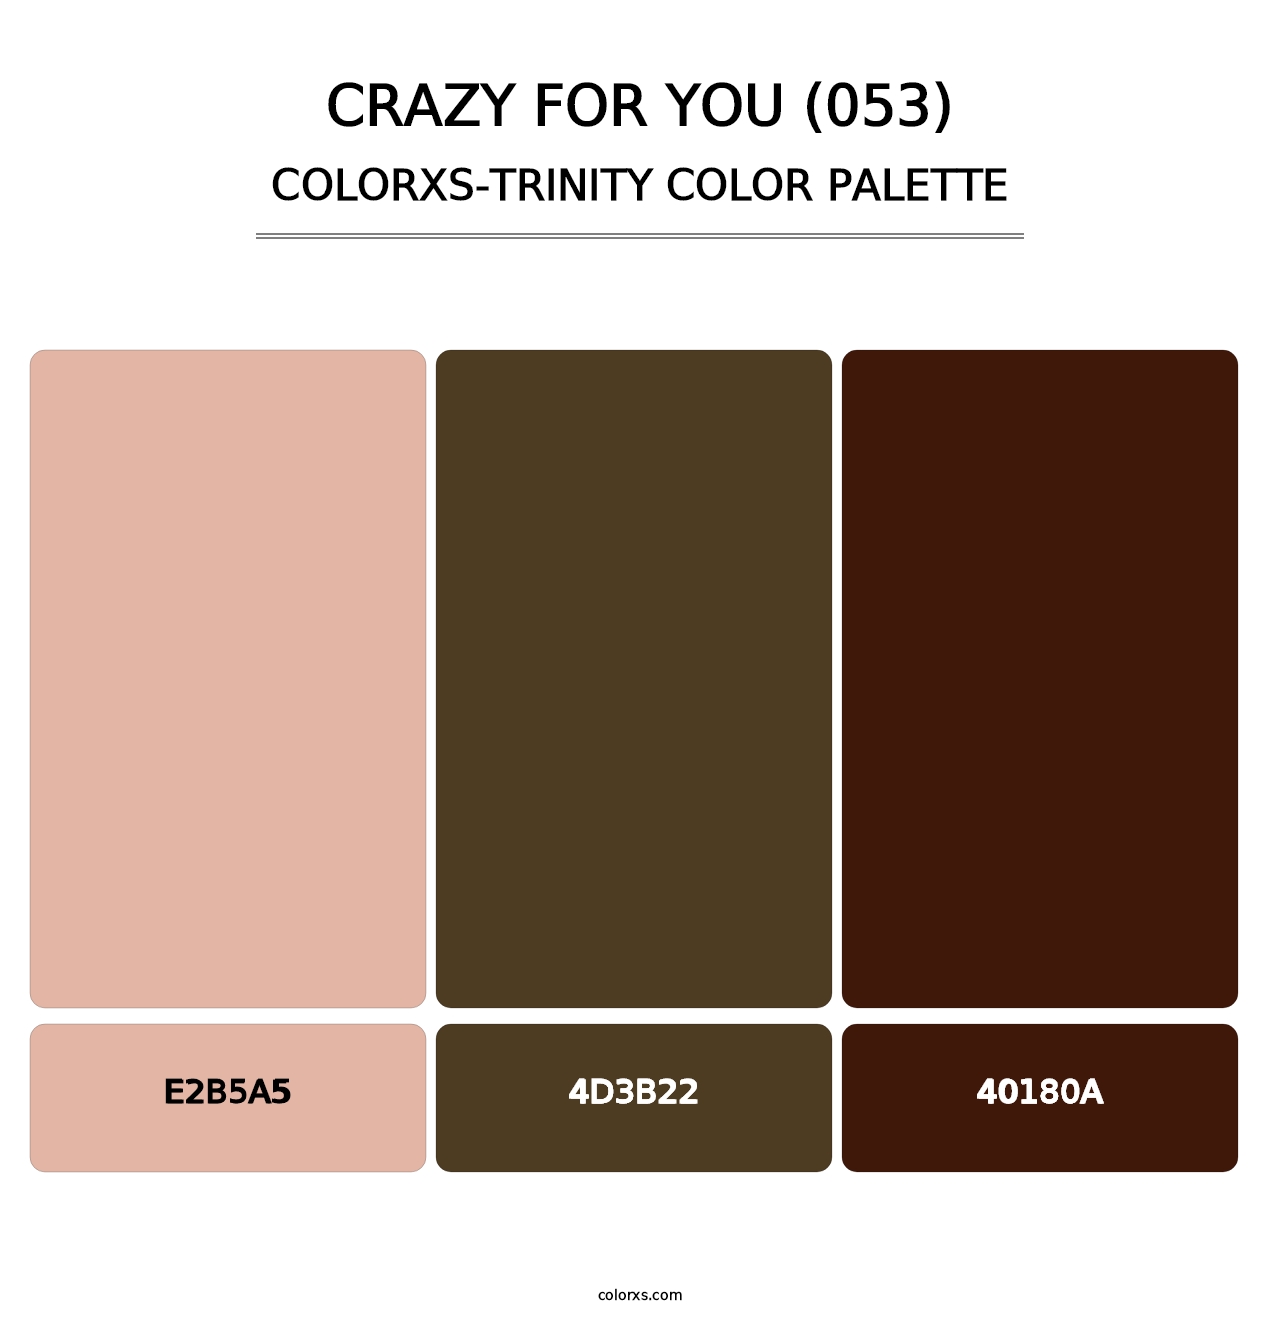 Crazy For You (053) - Colorxs Trinity Palette